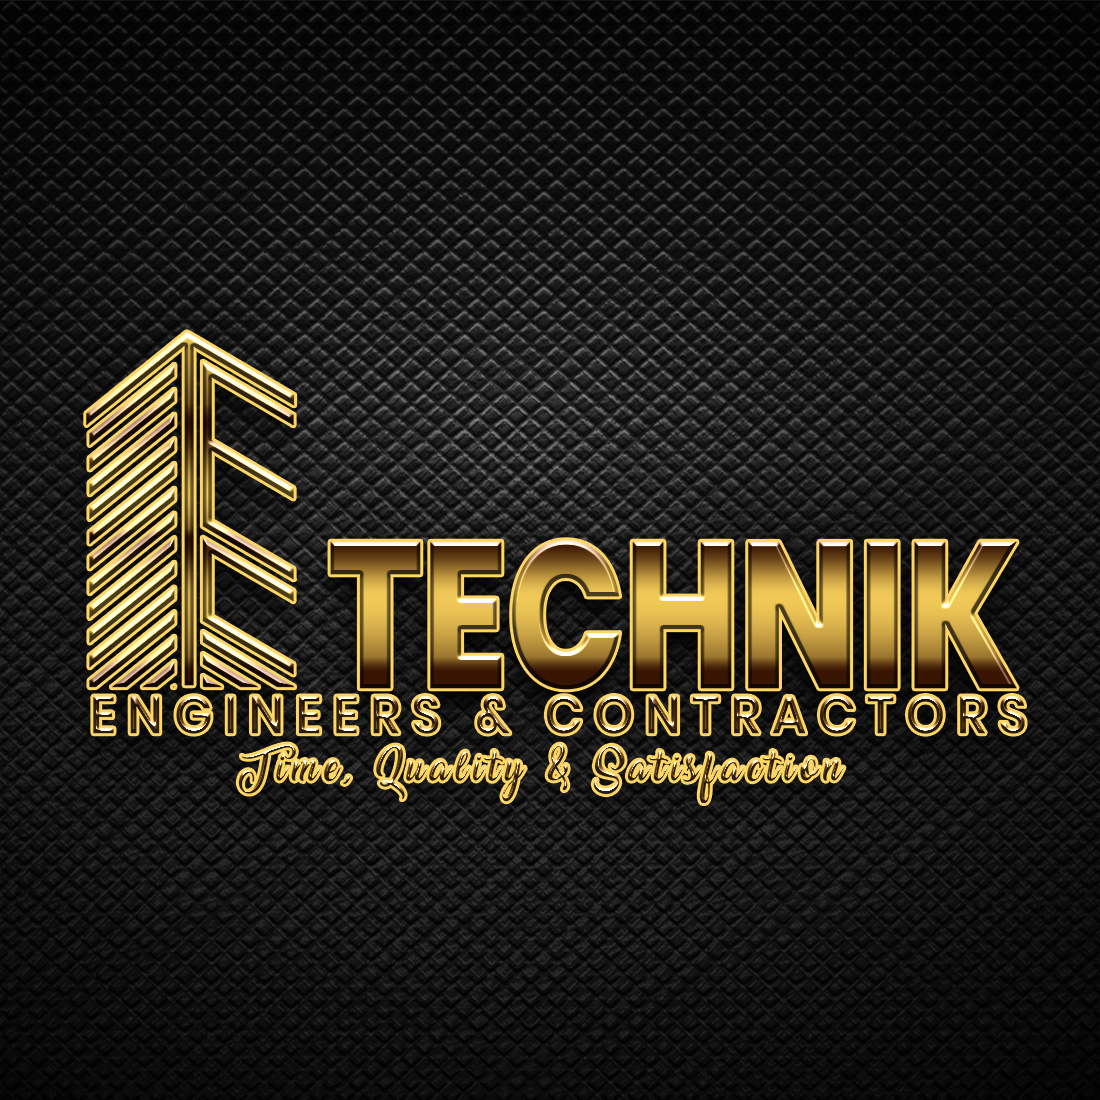 Building and Technology Concept Logo cover image.